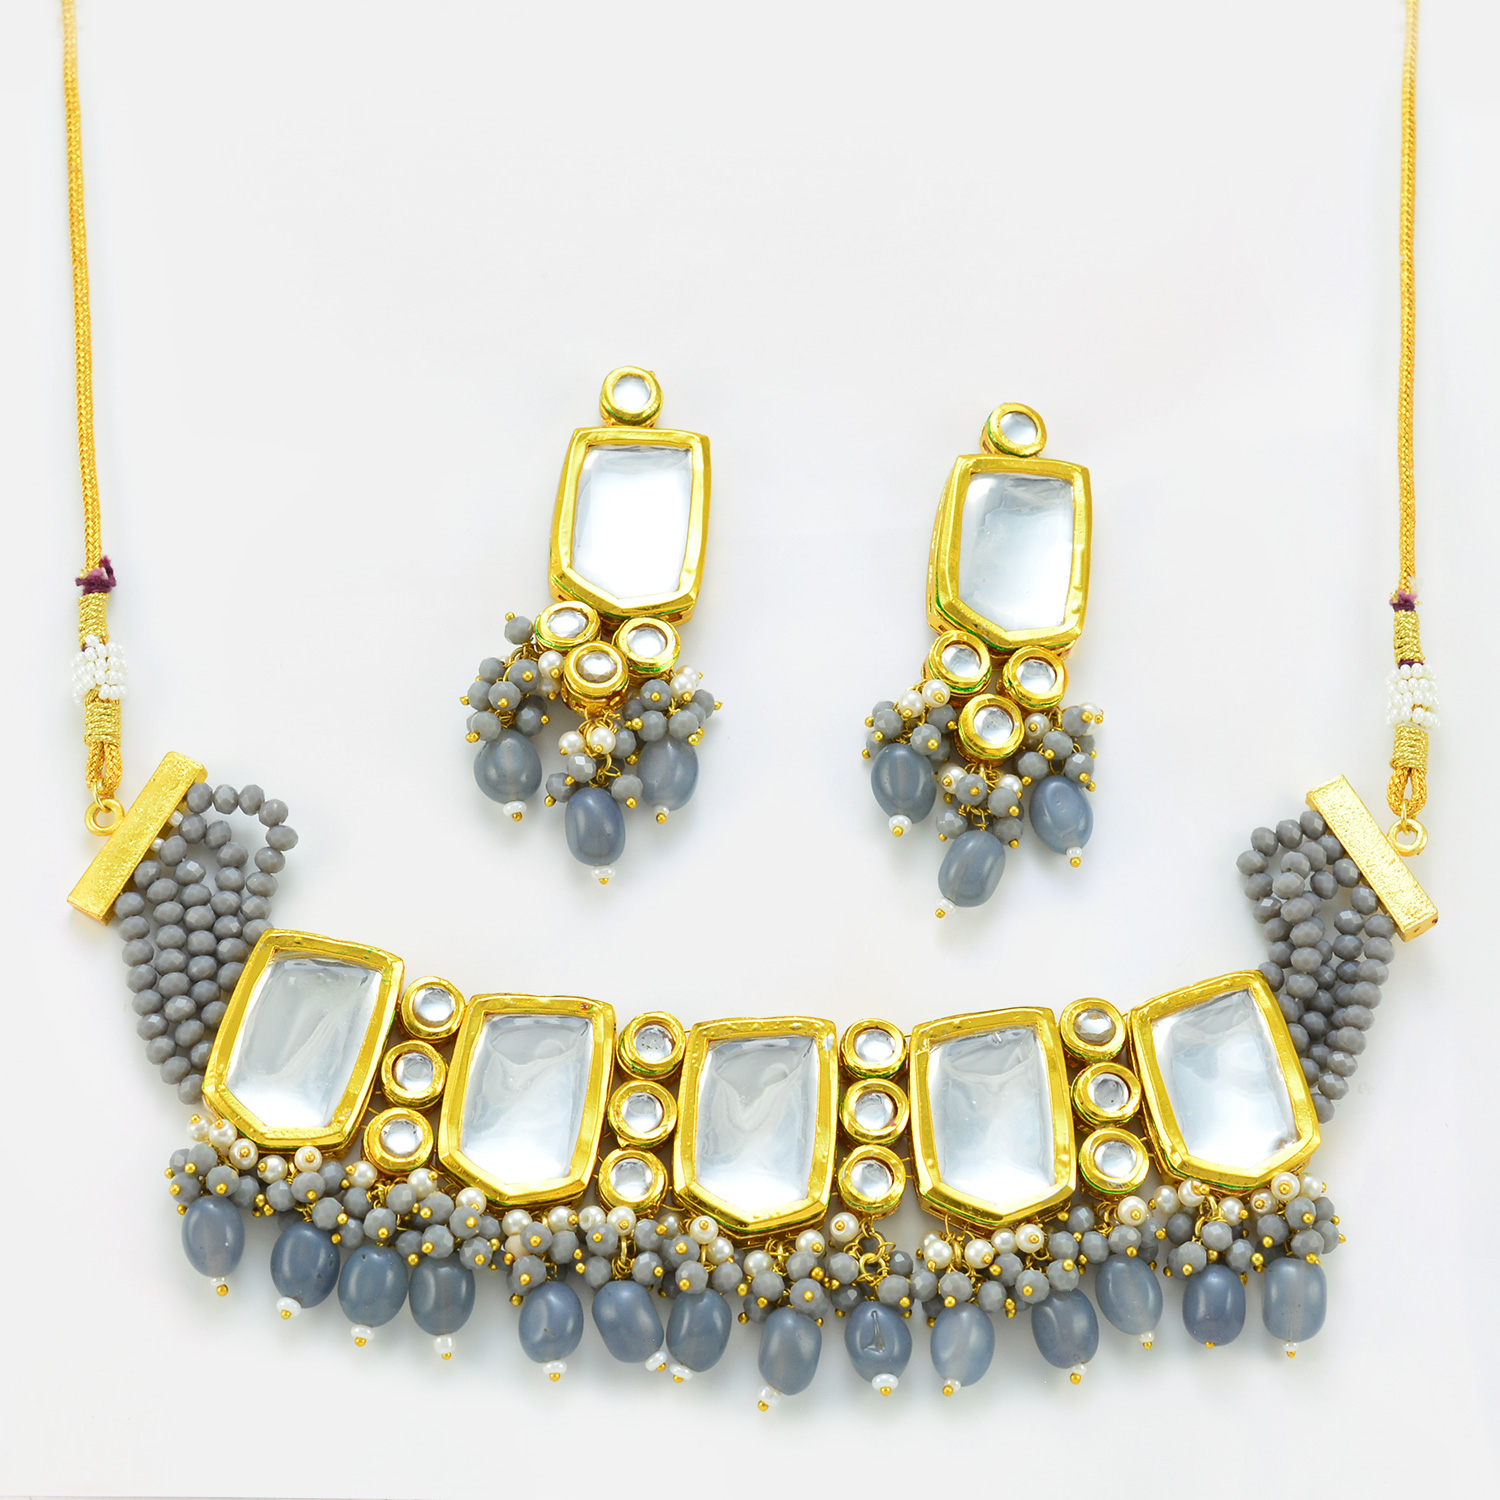 Good Looking Big Necklace With Beads and Jhumka